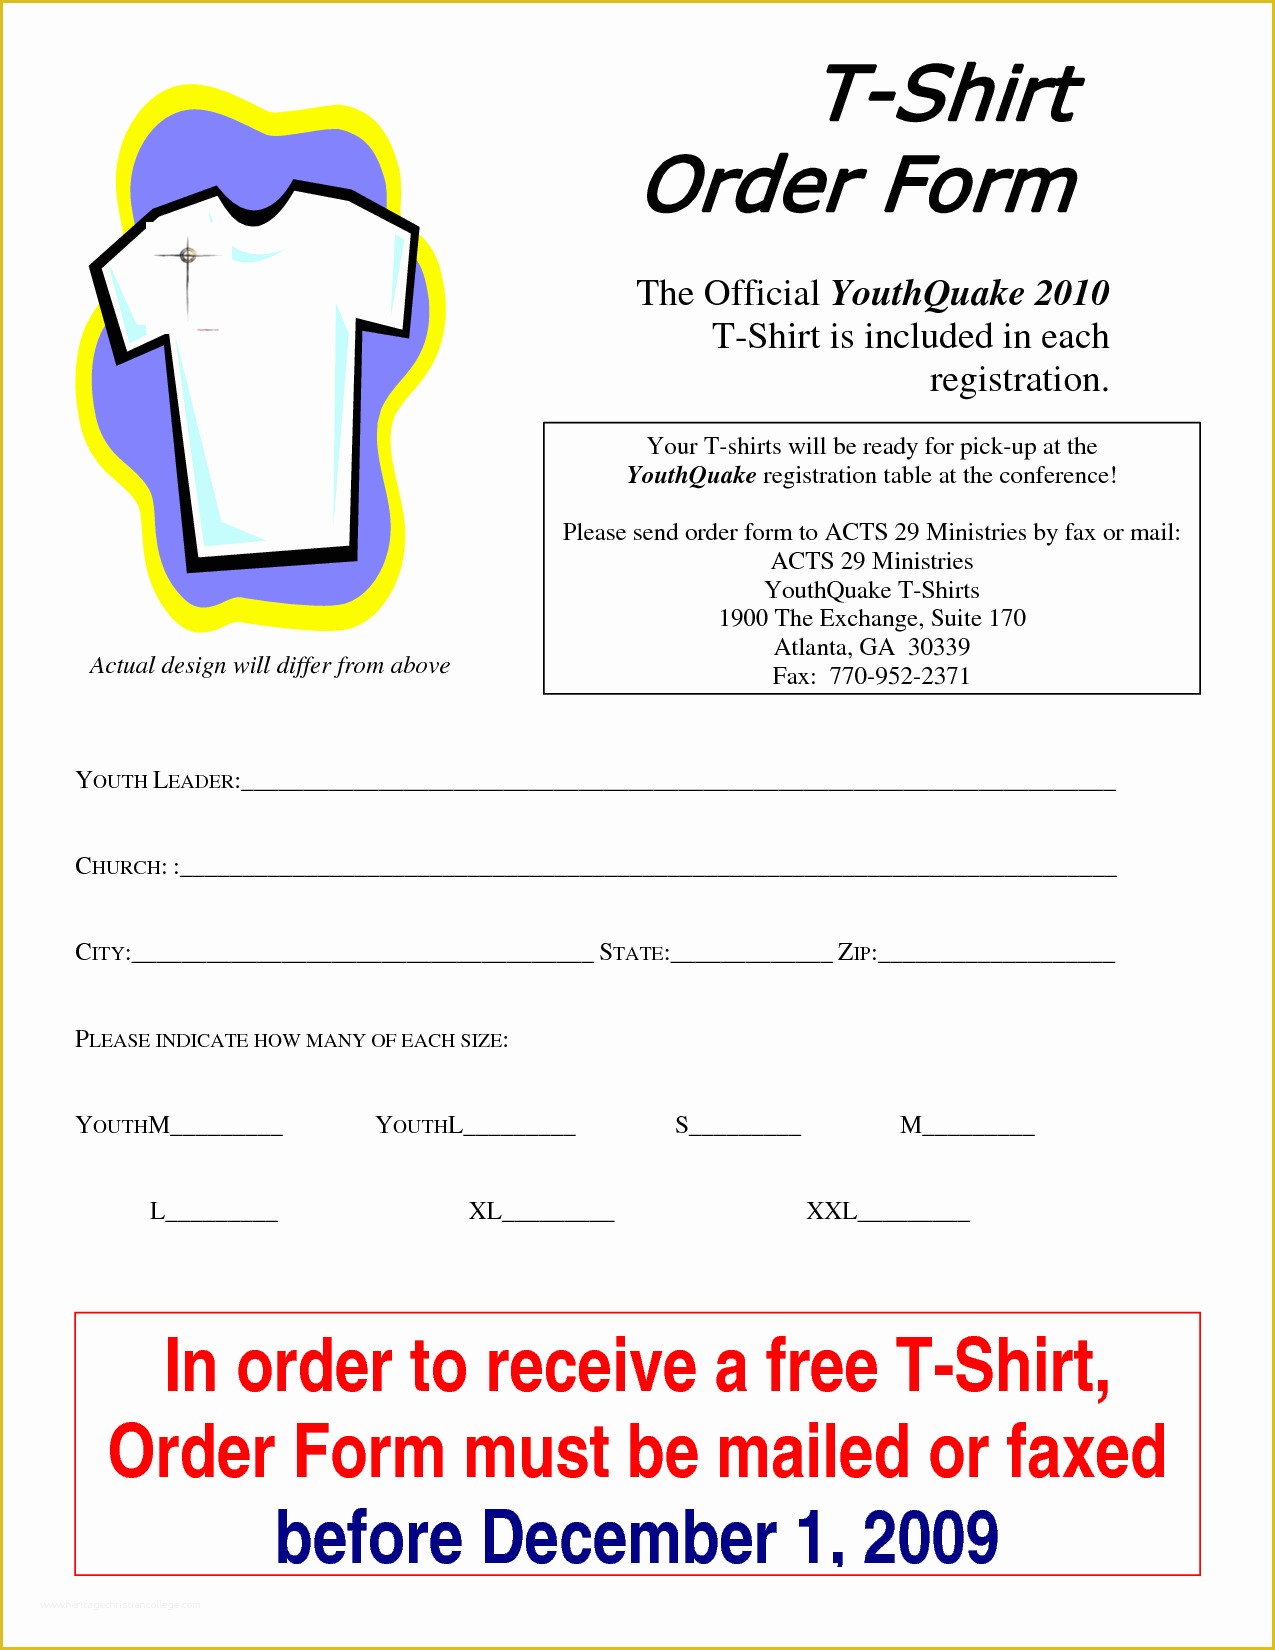 free-shirt-order-form-template-of-t-shirt-order-form-6-free-templates